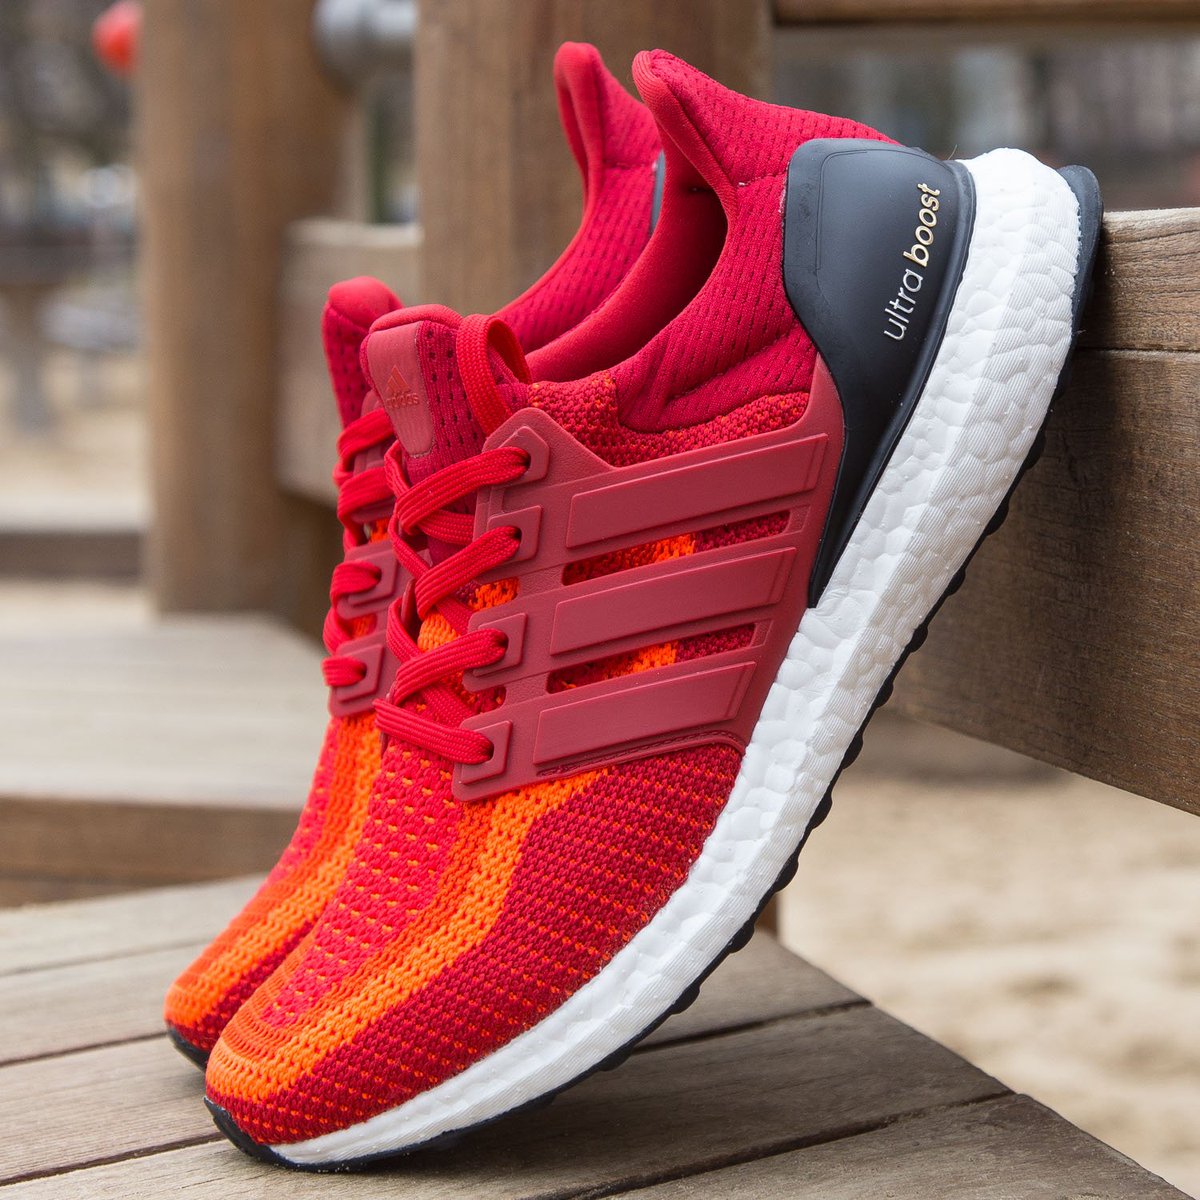 ultra boost 2.0 red gradient